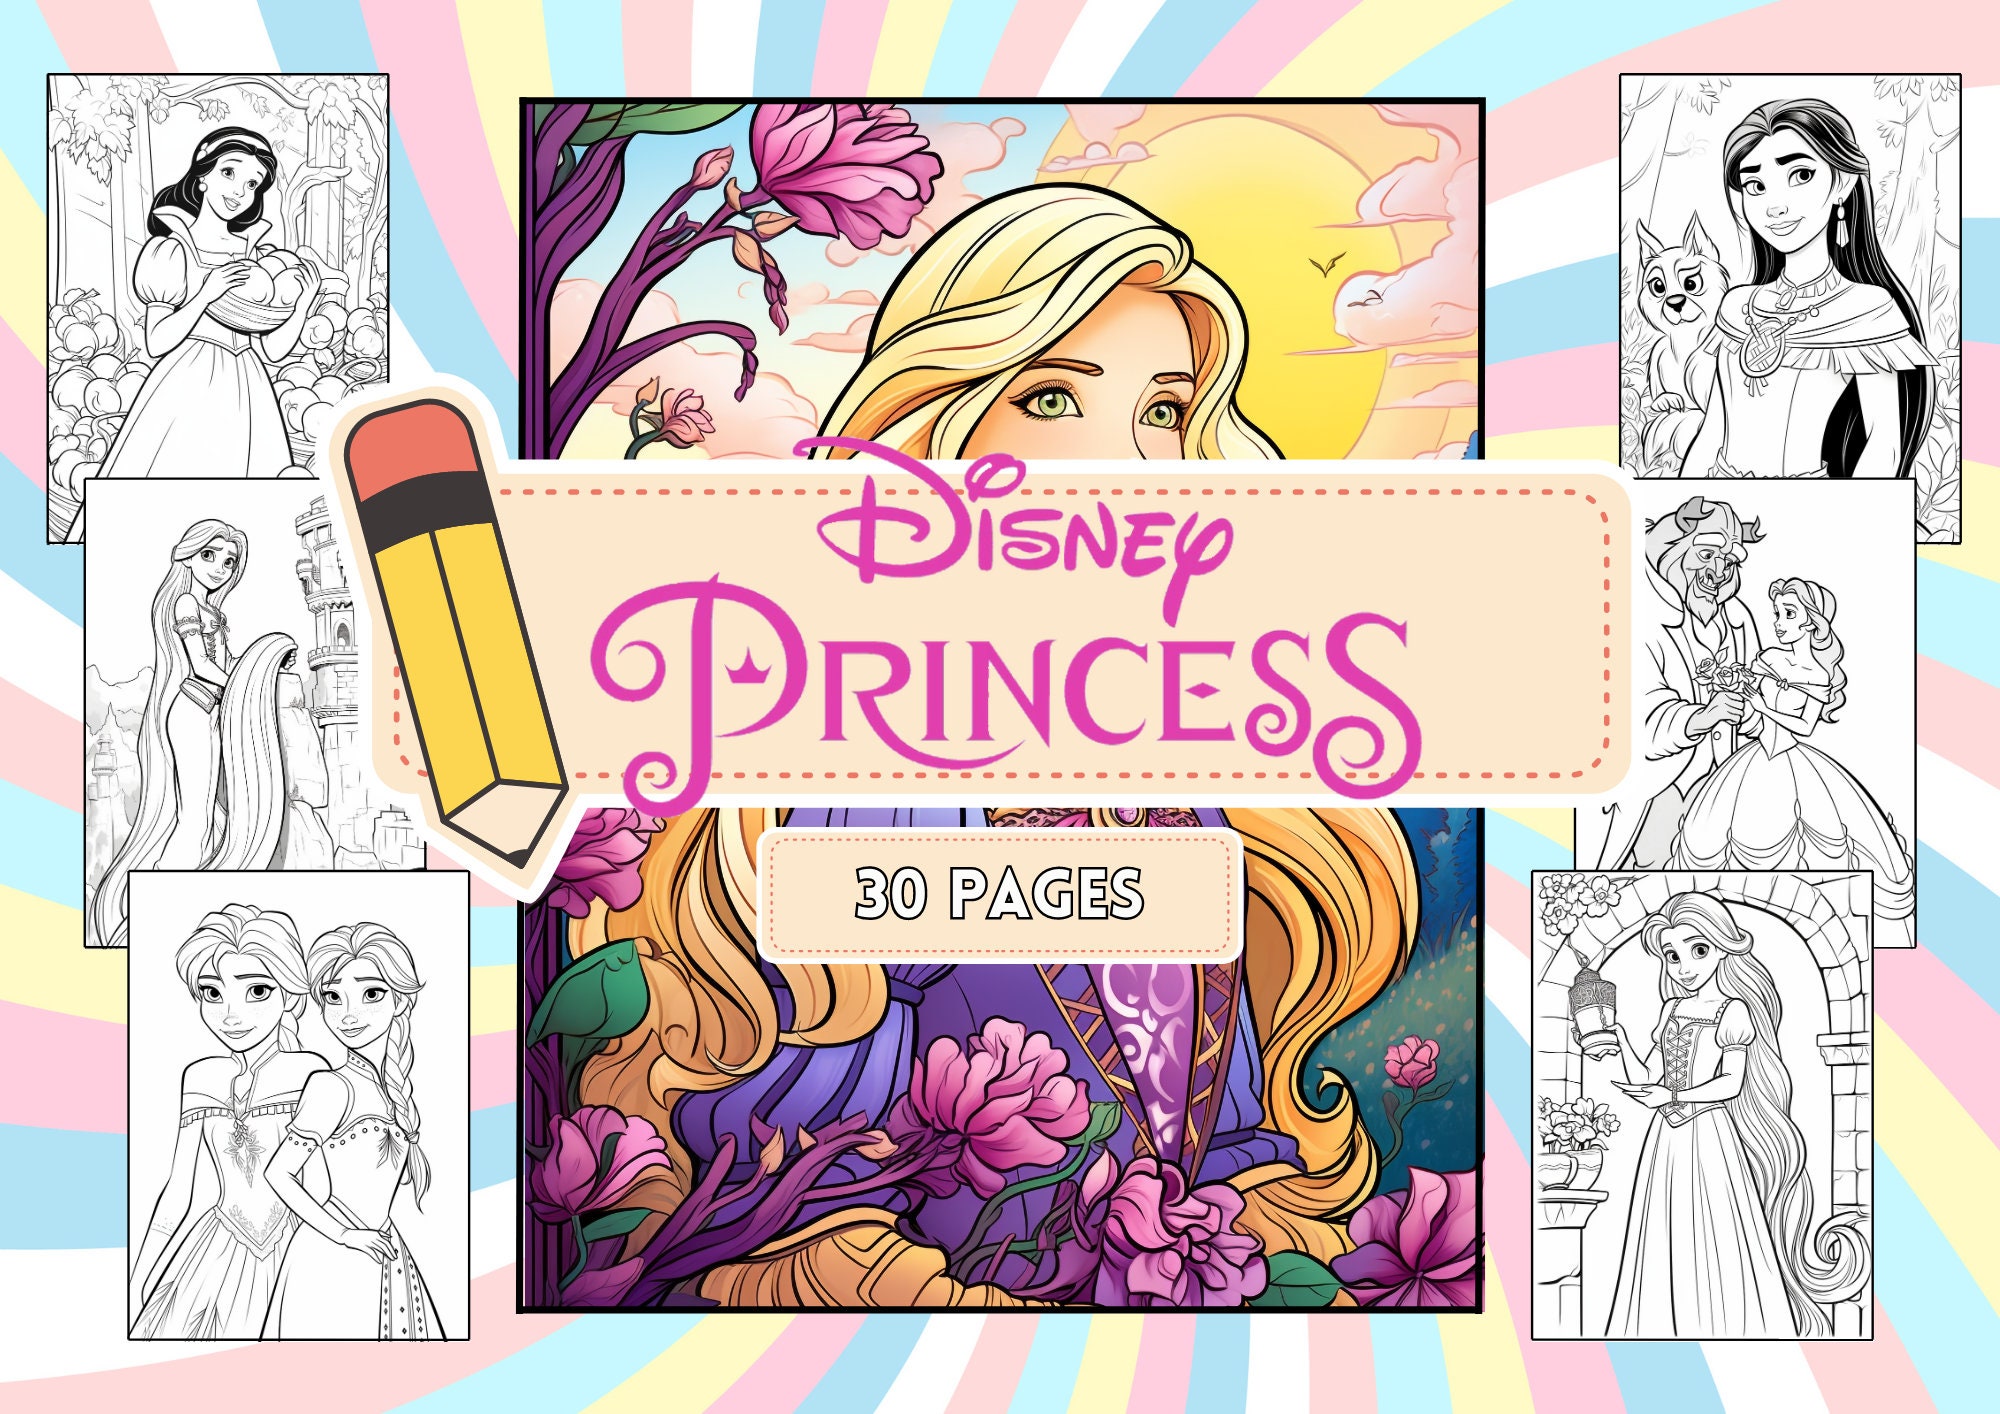 Fairytale Princess Coloring Book for Kids & Adults 